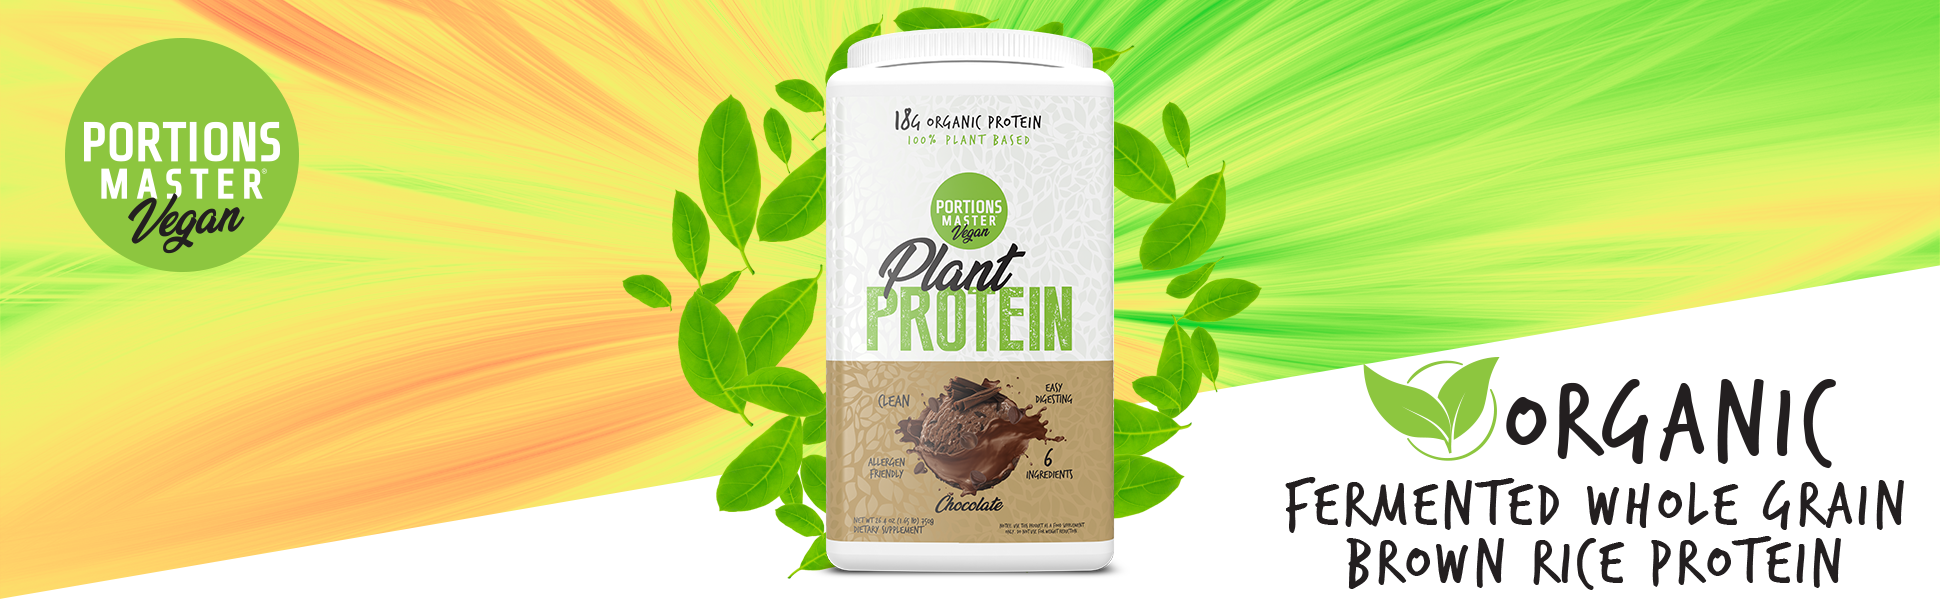 Chocolate Plant Protein Banner